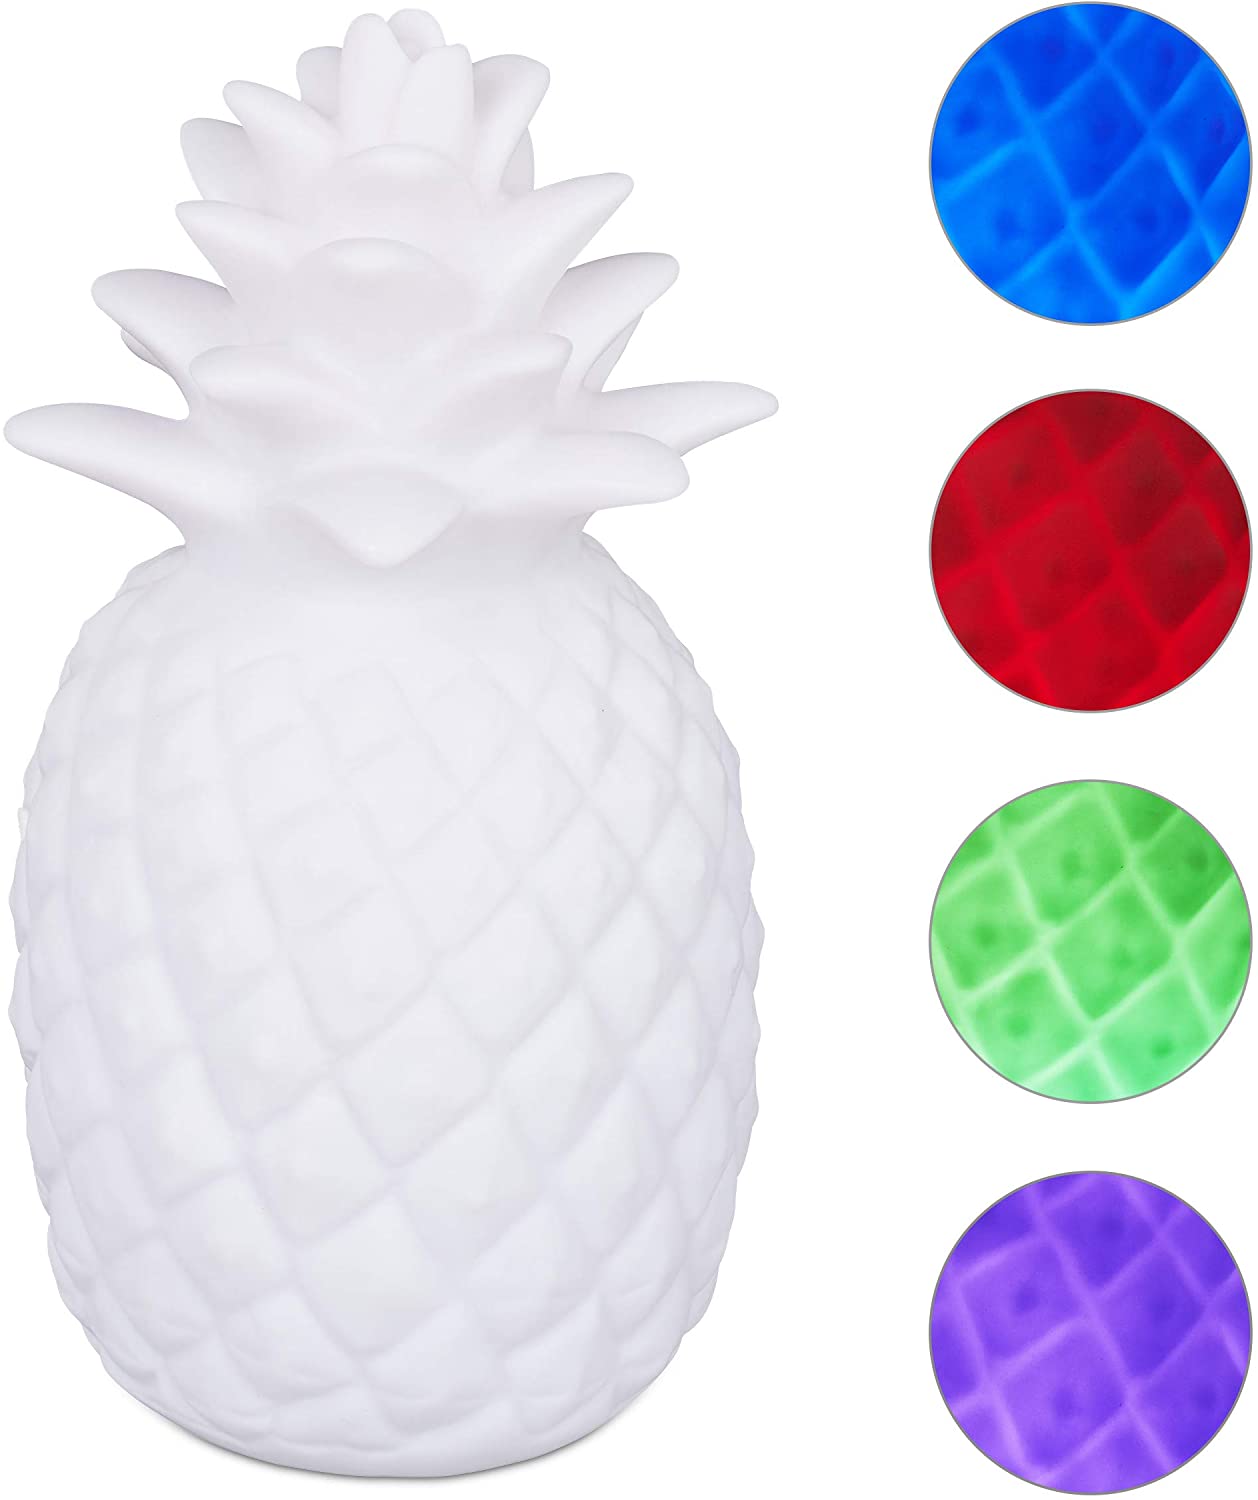 Relaxdays Pineapple Light, Led Night Light With Colour Changing Mood Light 